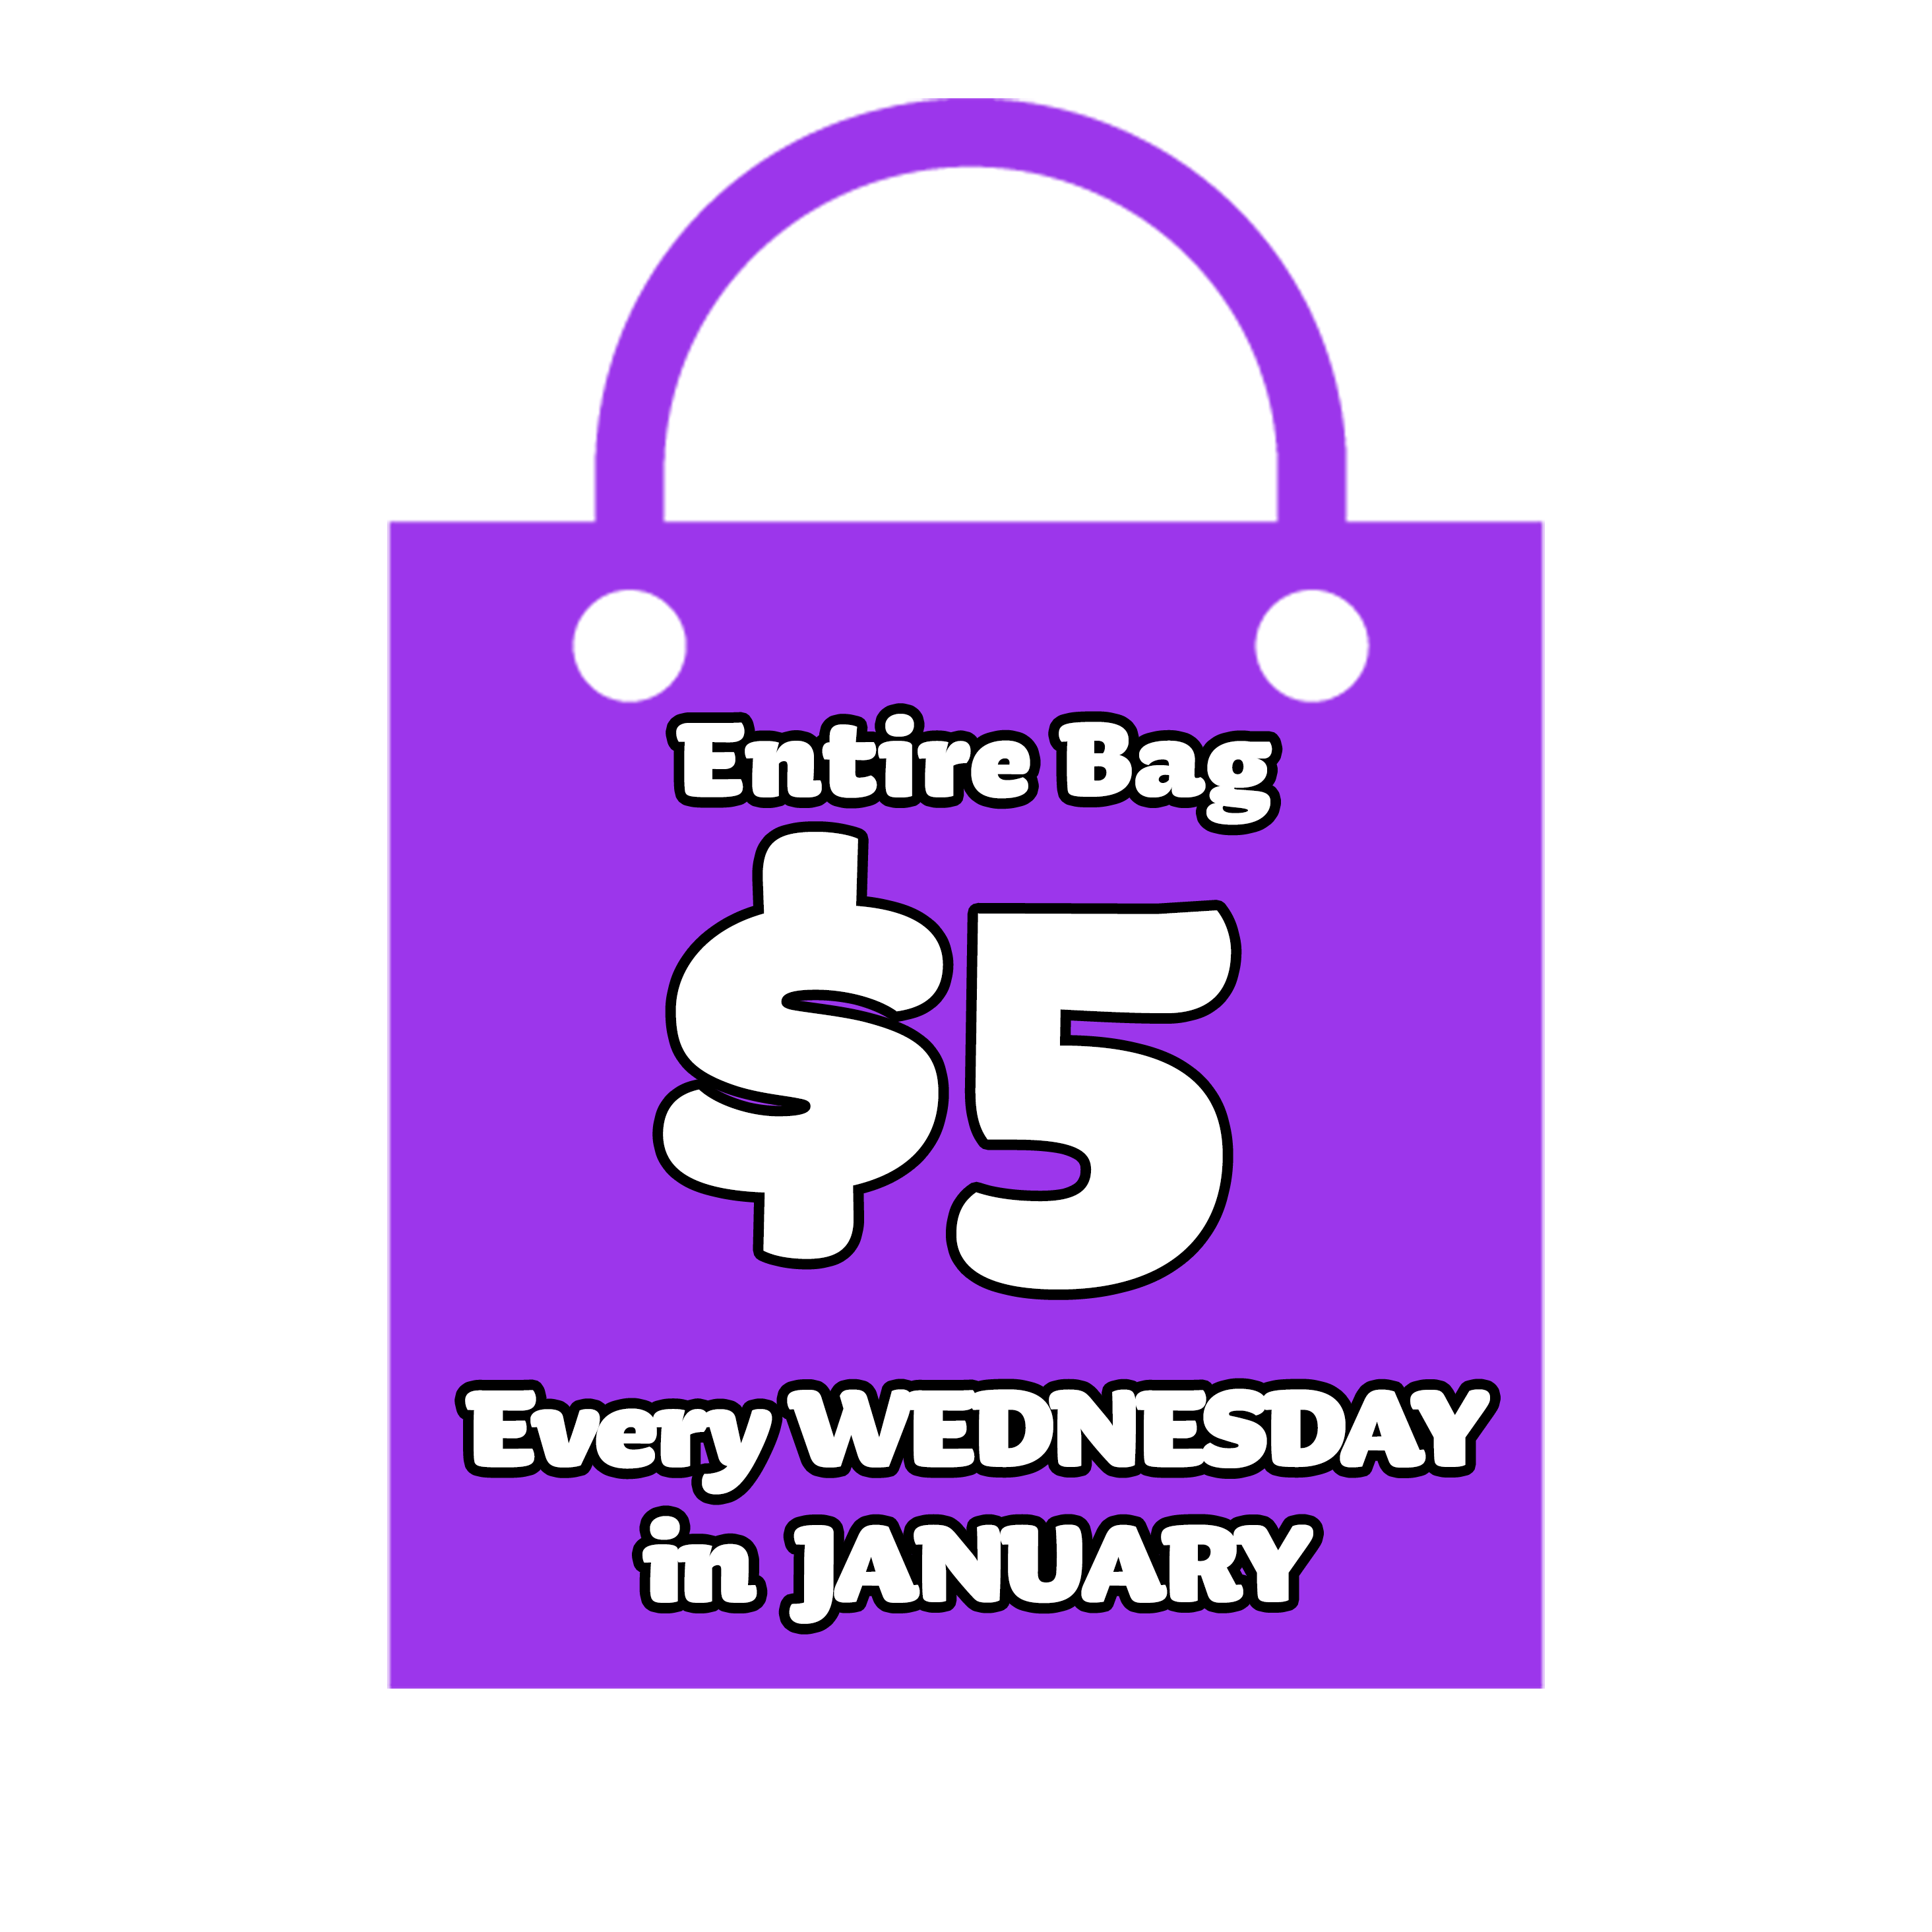 Entire Bag $5 Every Wednesday in January